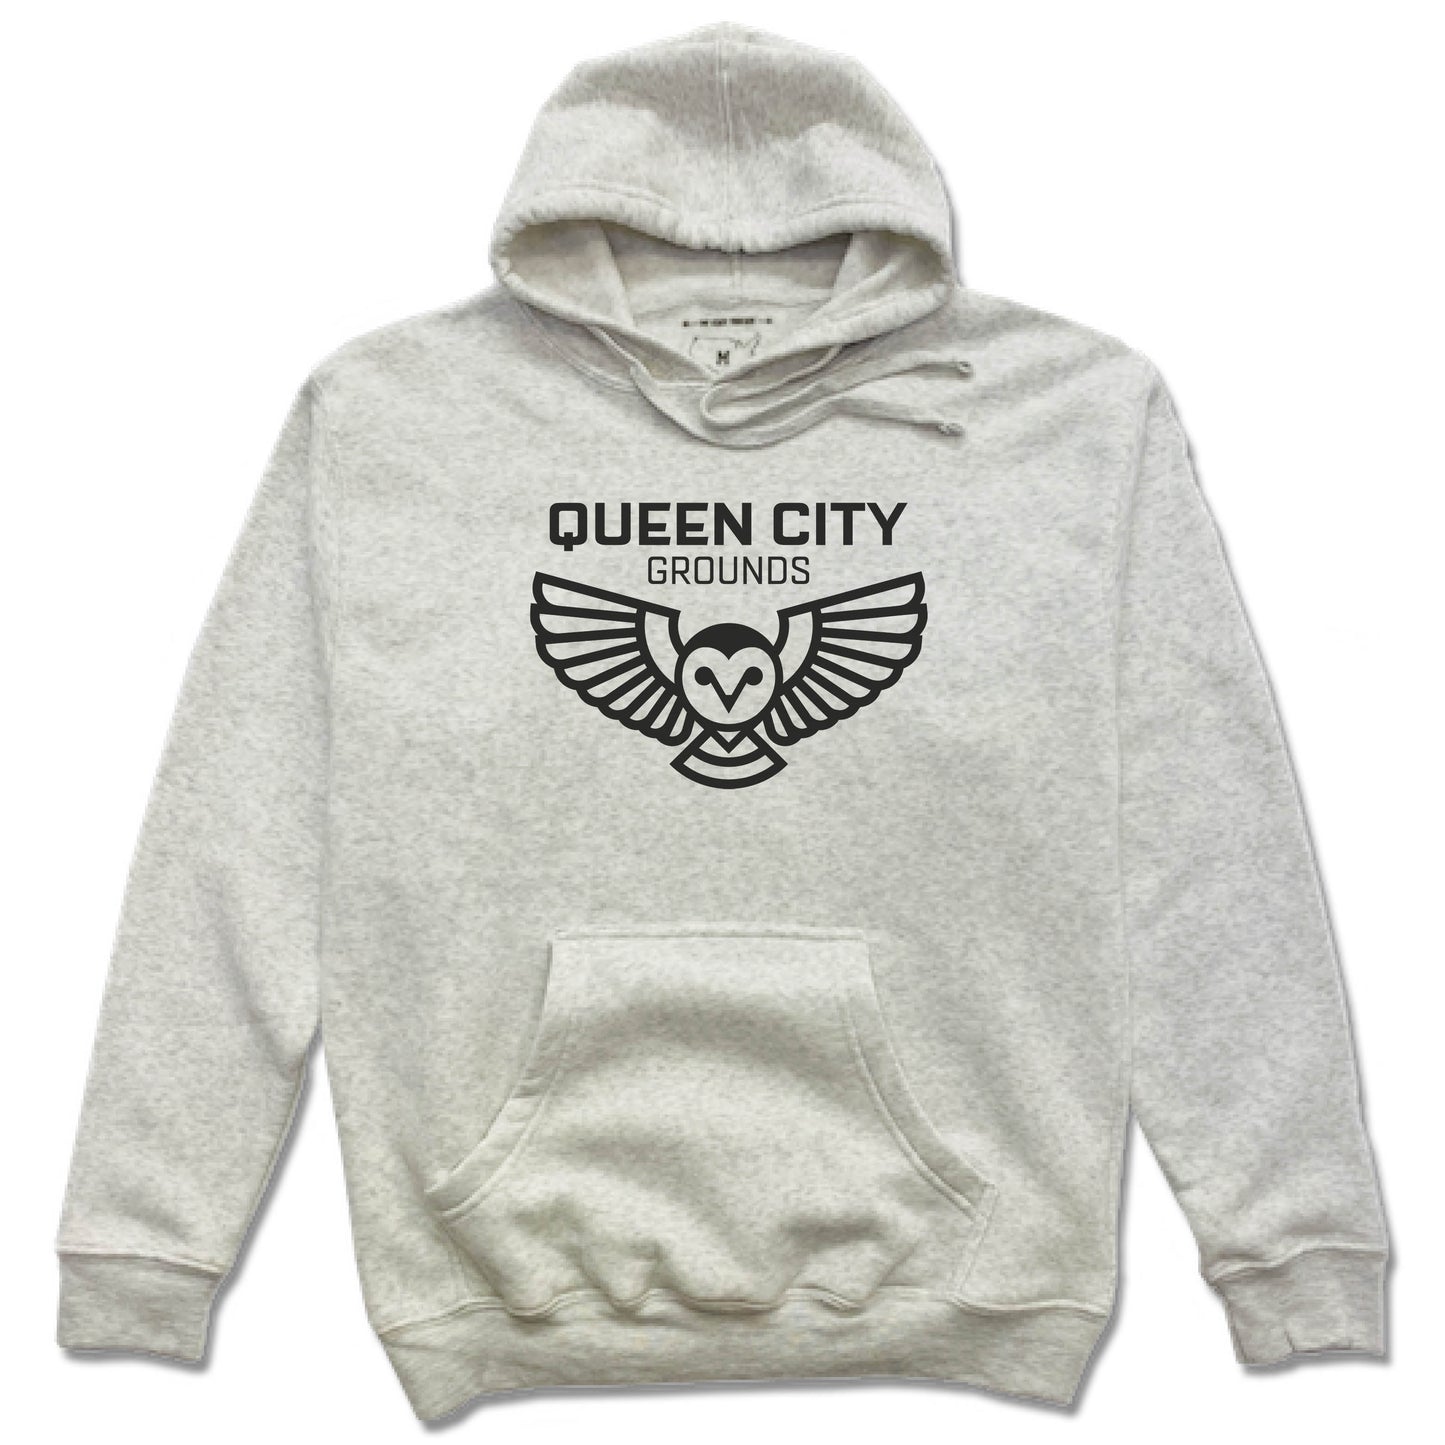 QUEEN CITY GROUNDS | FRENCH TERRY HOODIE